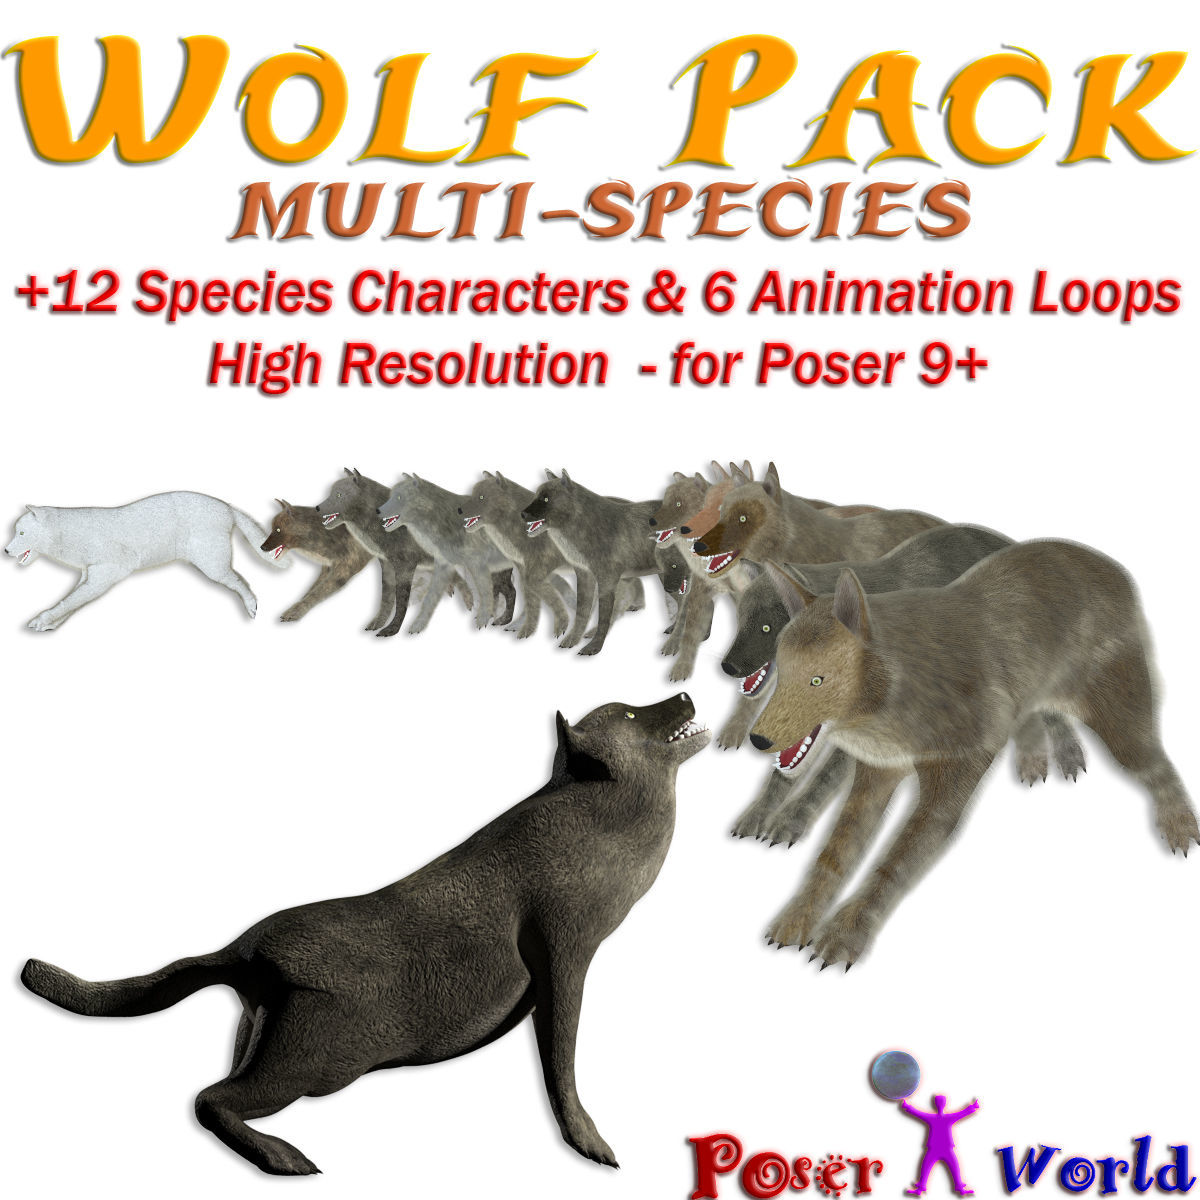 Wolf Pack Multi-Species - animated canine figure for PoserPoserWorld 3D  Model Content Store for Poser and DAZ 3D Studio